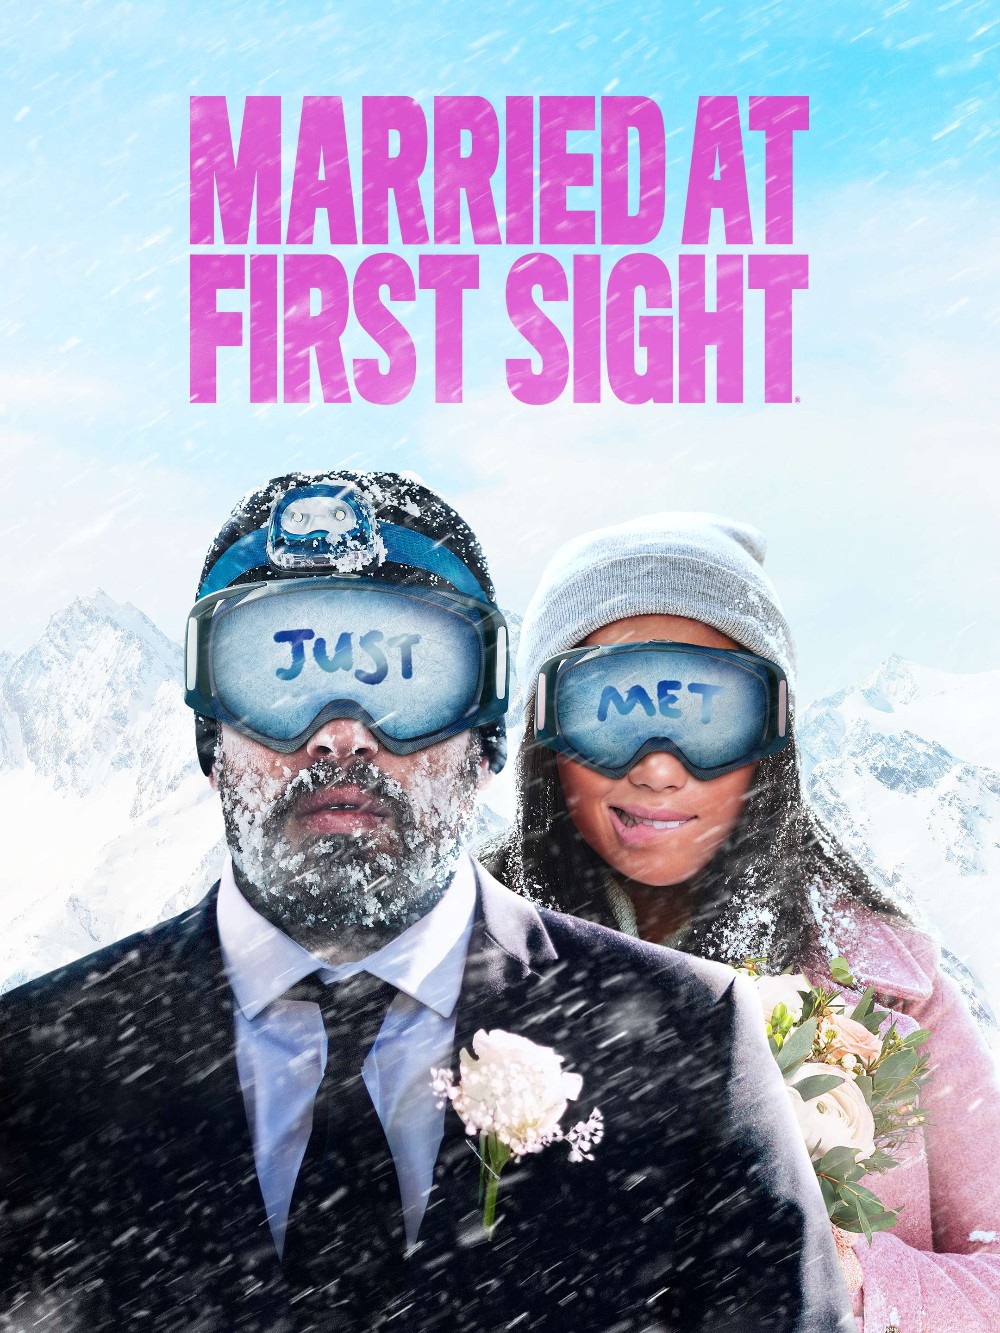 Married At First Sight S17E00 Afterparty Somethings Fishy [720p] (x265) 9e23cfd2560fb720e7f7028f71d4d16b